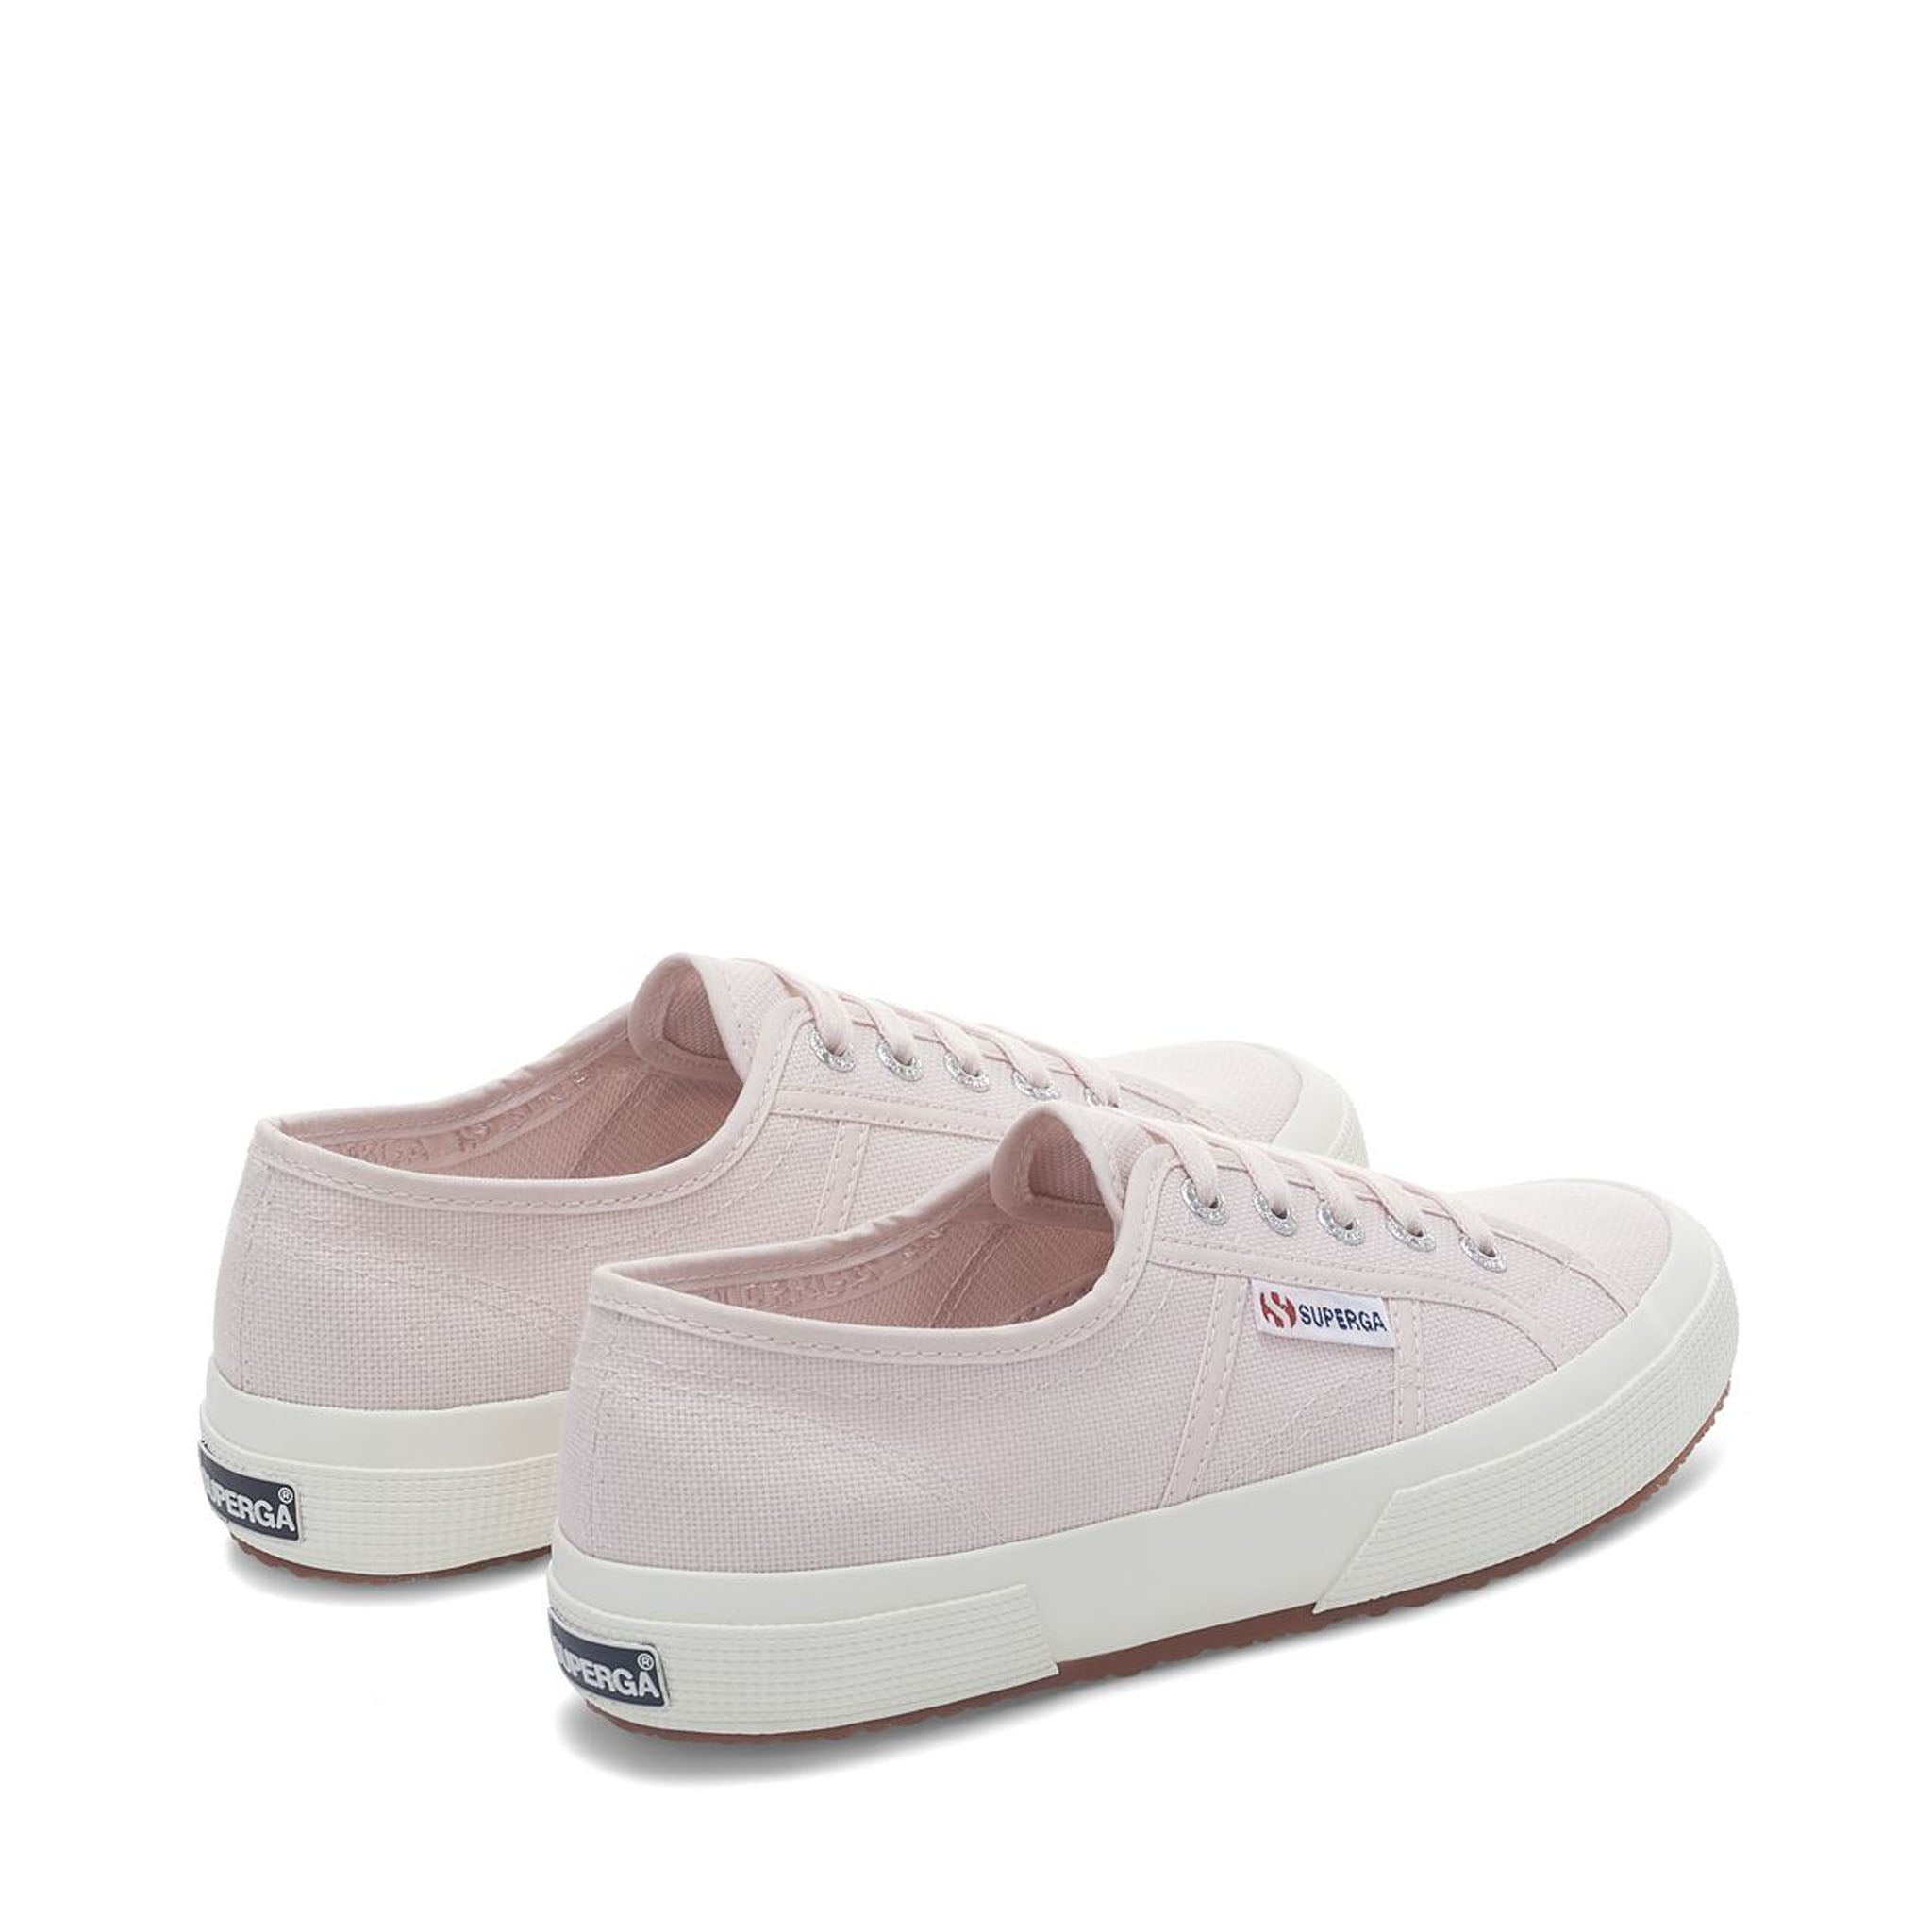 Superga 2750 Cotu Classic Sneakers - Light Pink. Back view.